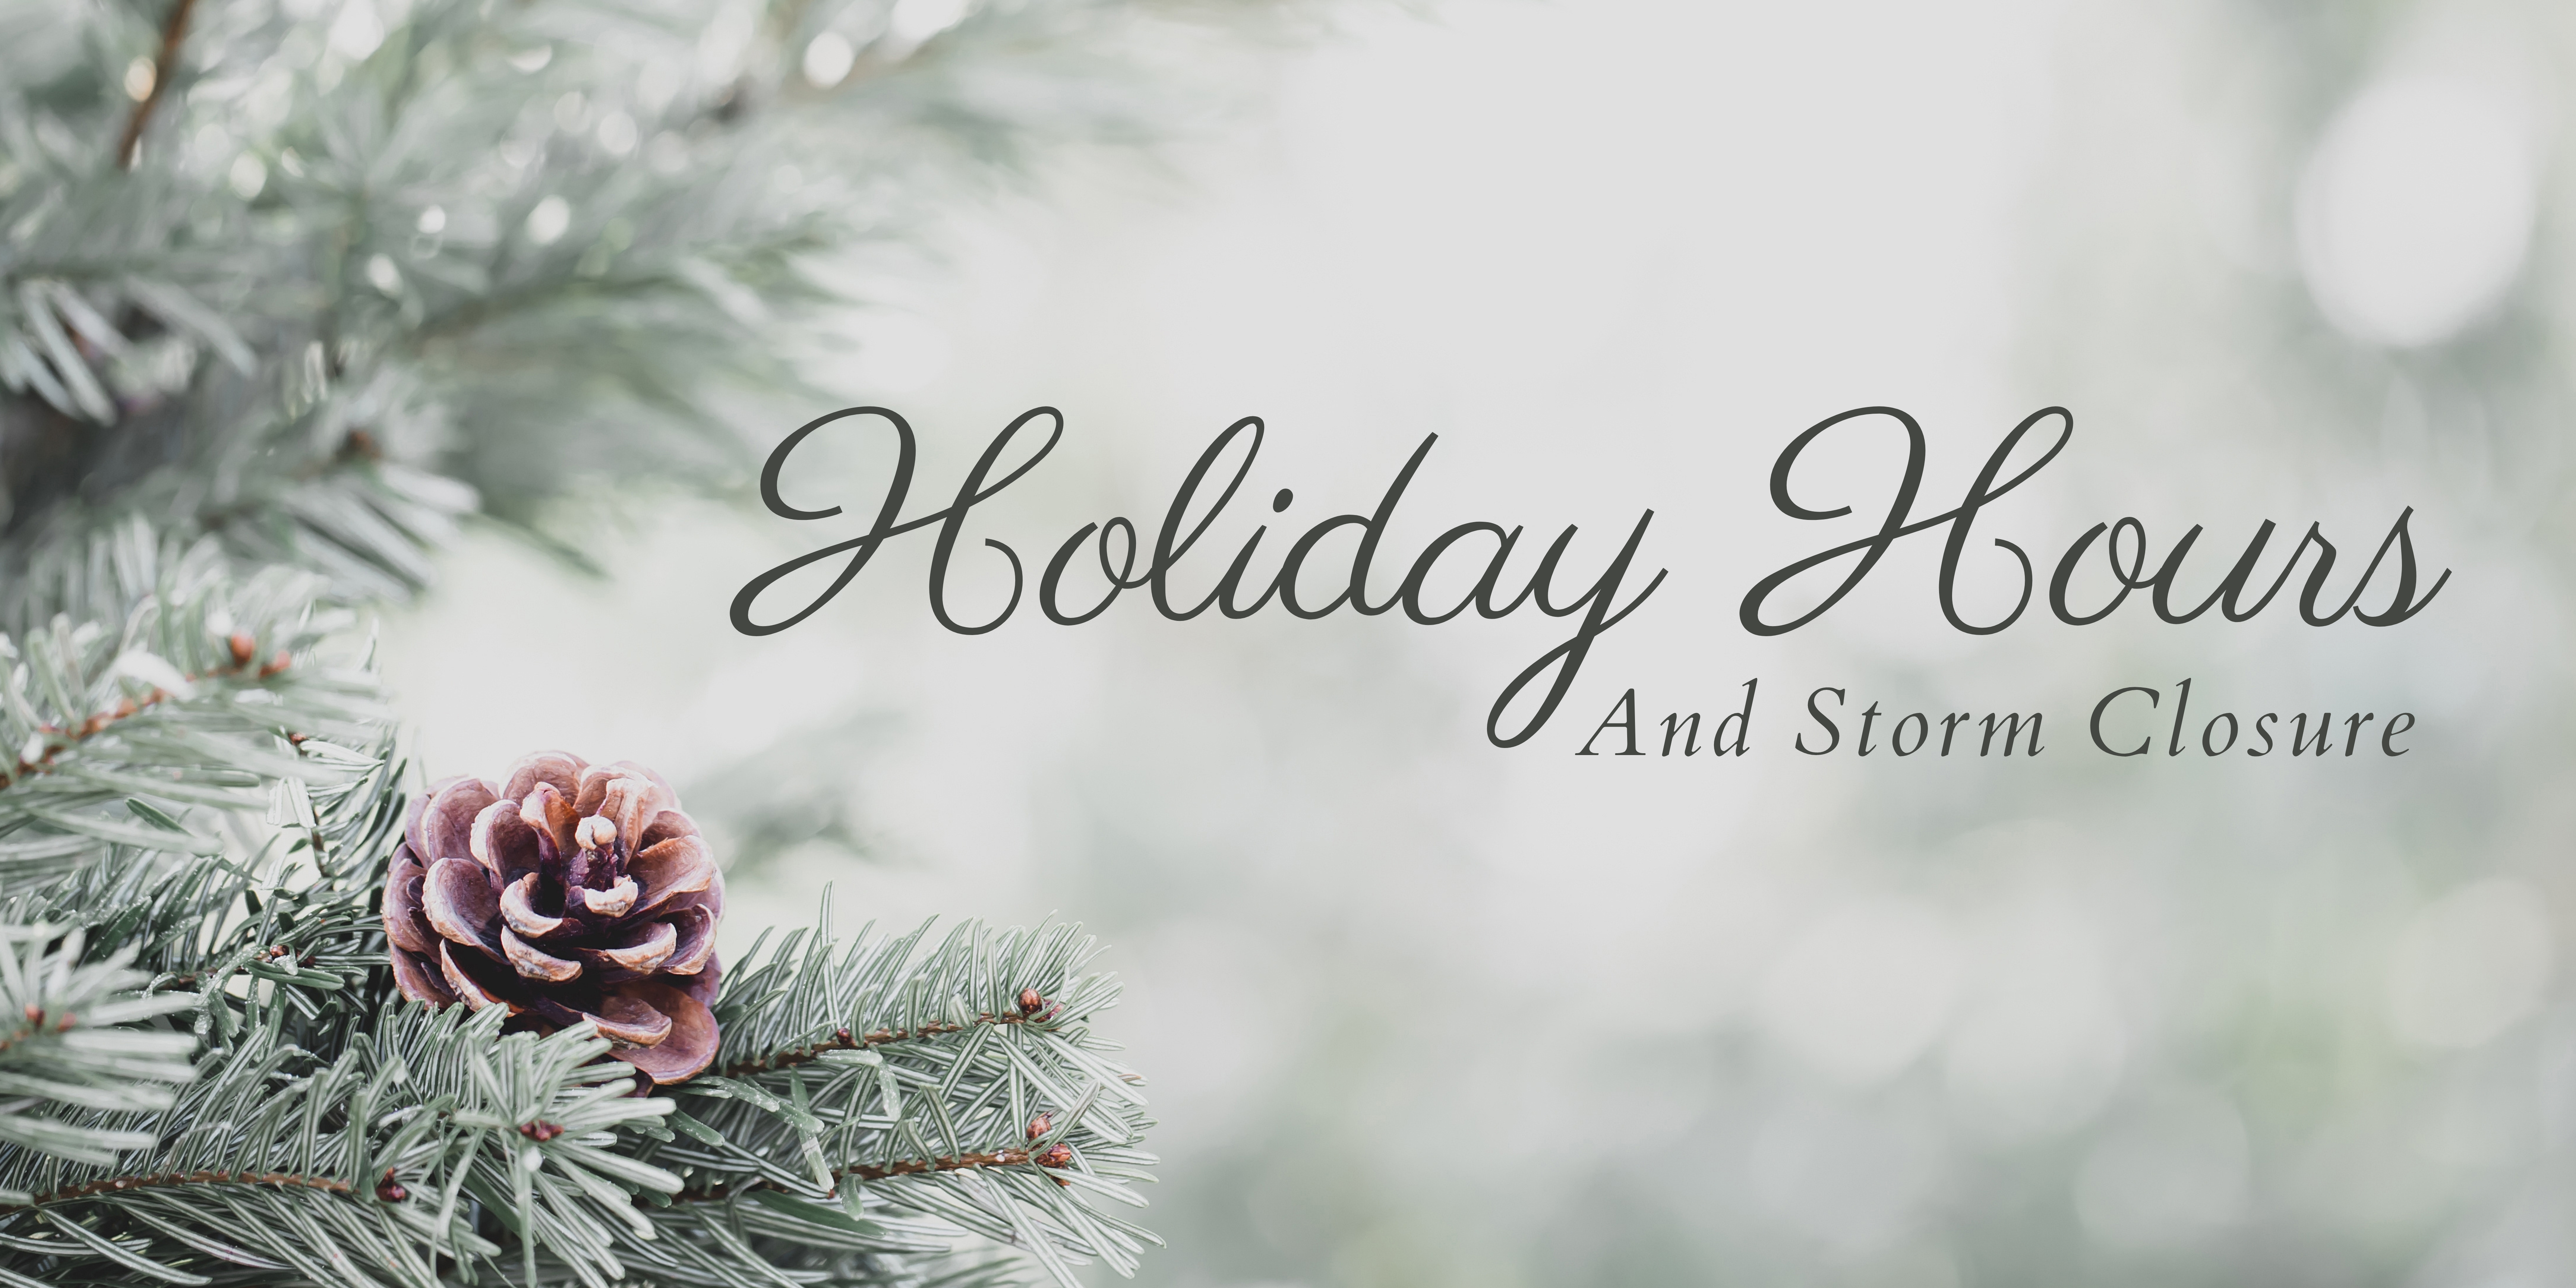 Early Closure and Holiday Hours